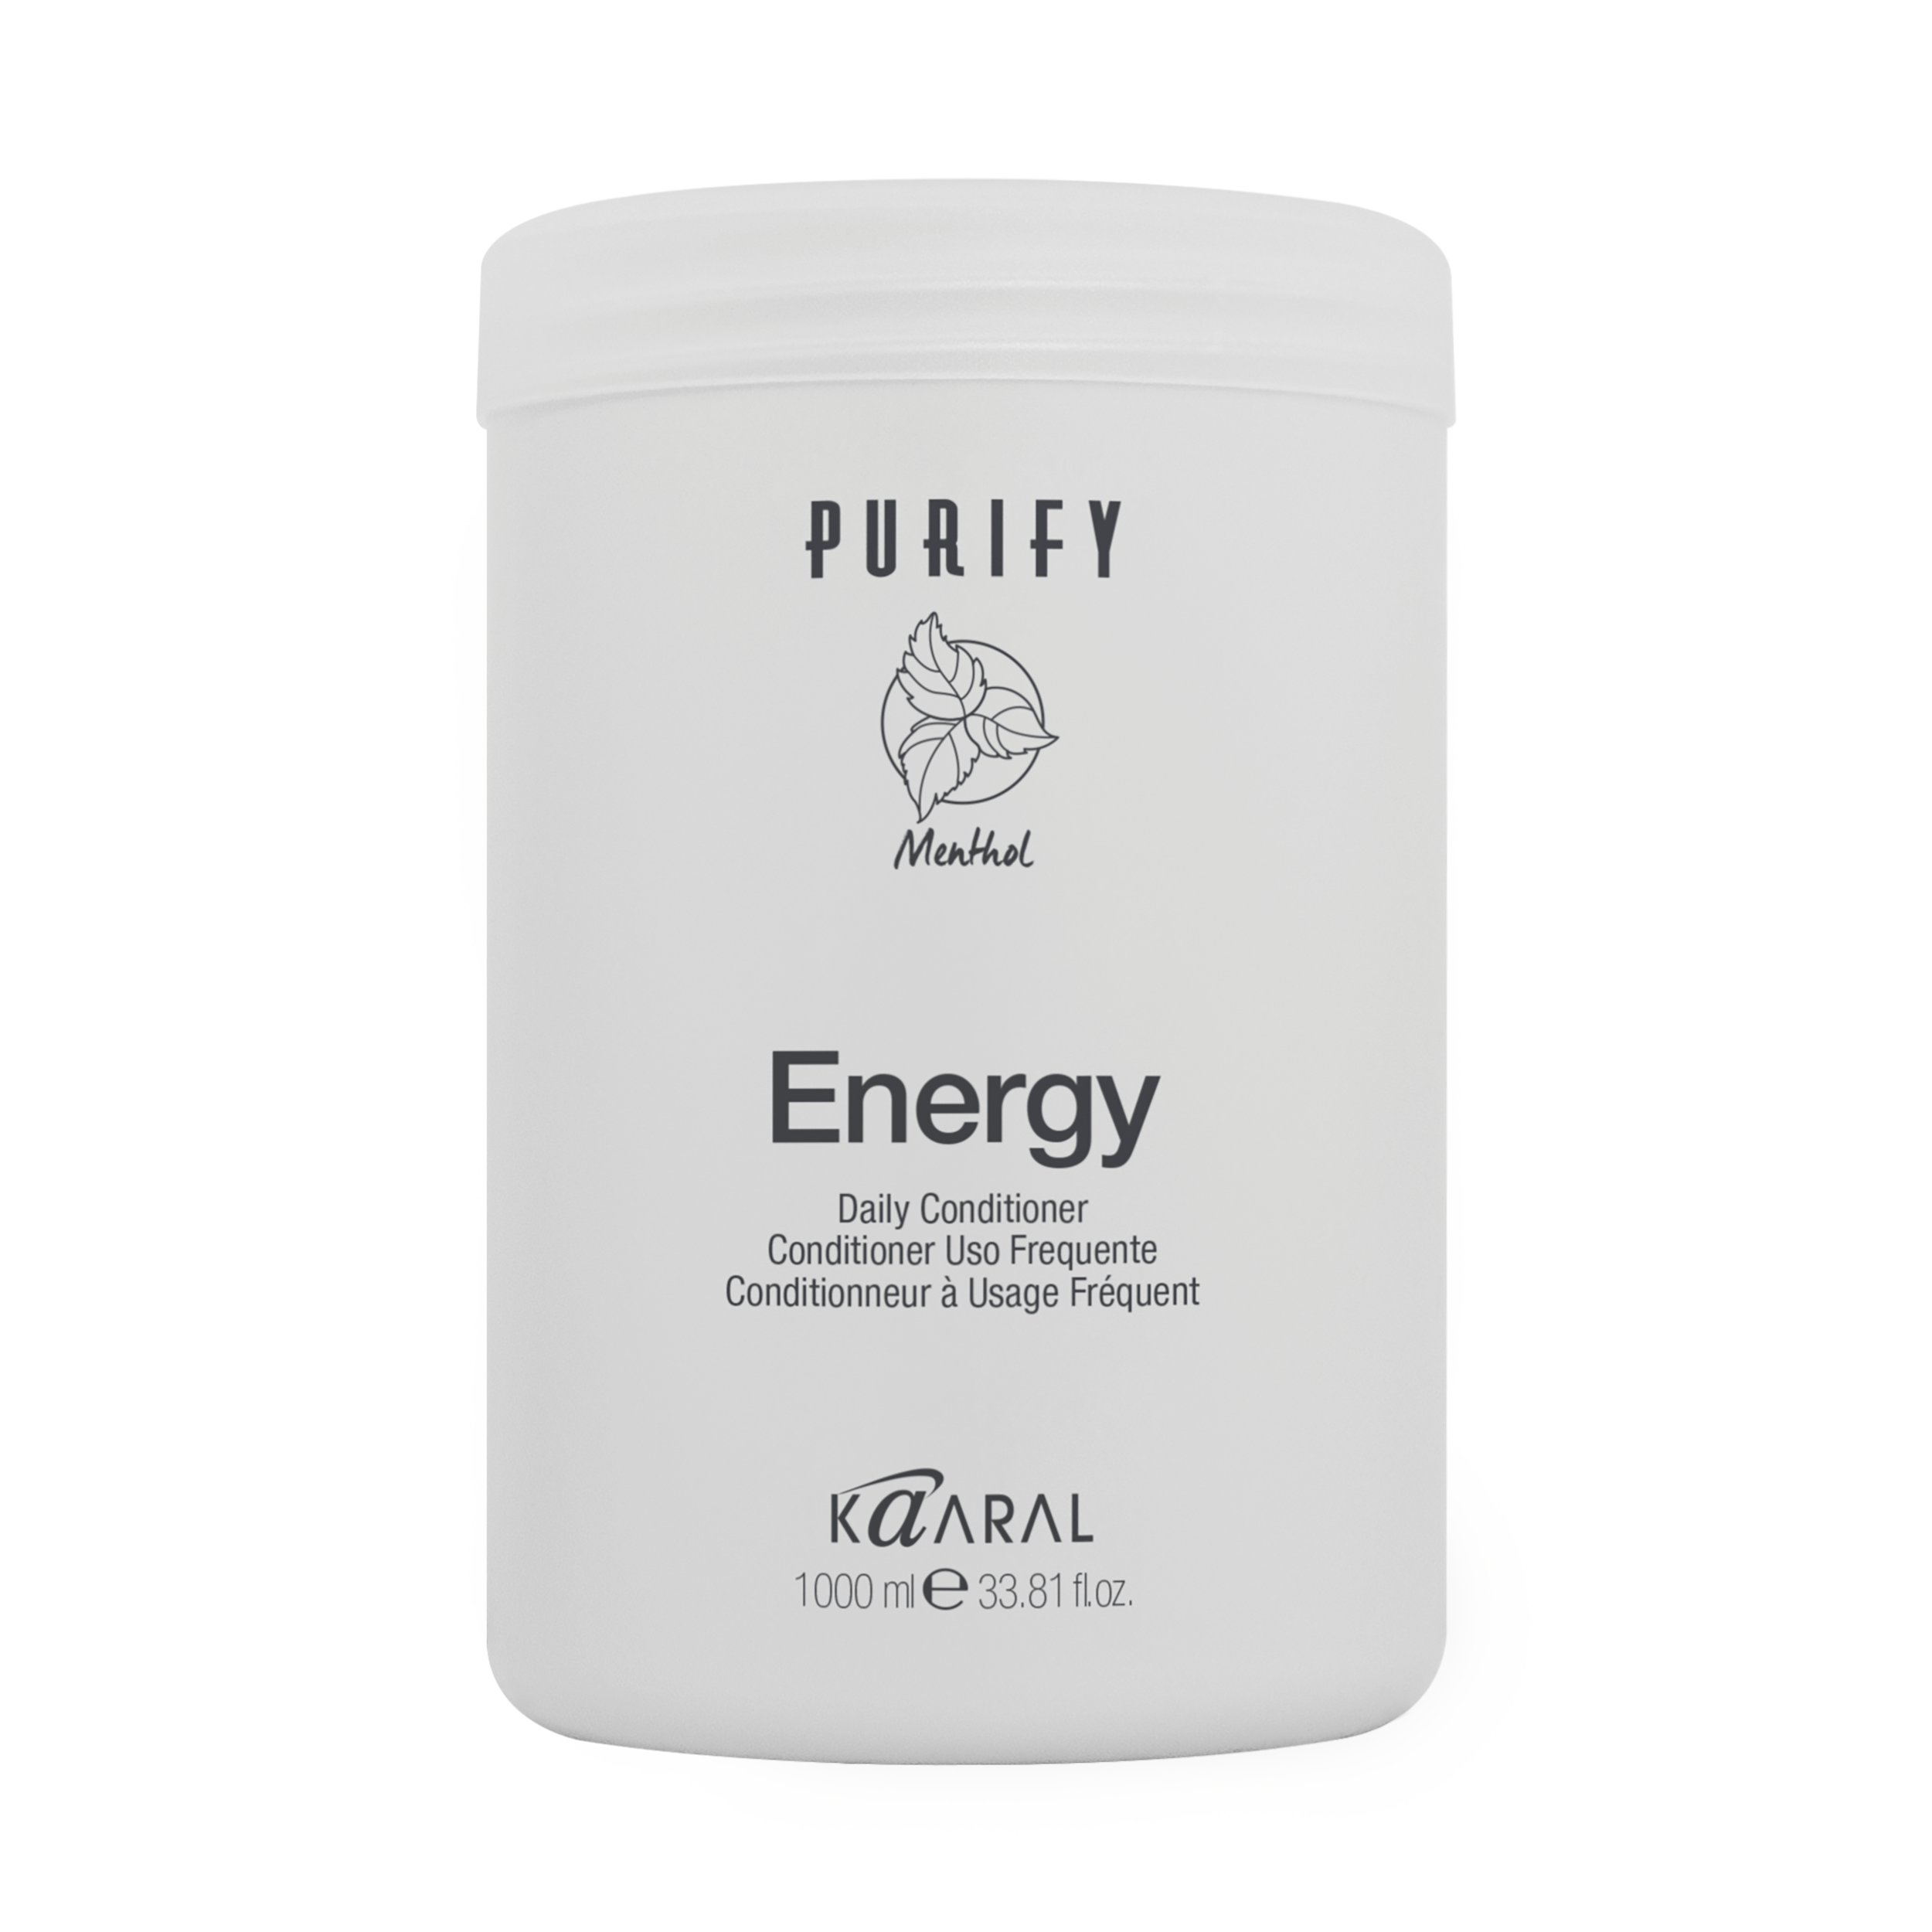 Kaaral - Purify Energy Conditioner Liter Size - Creata Beauty - Professional Beauty Products